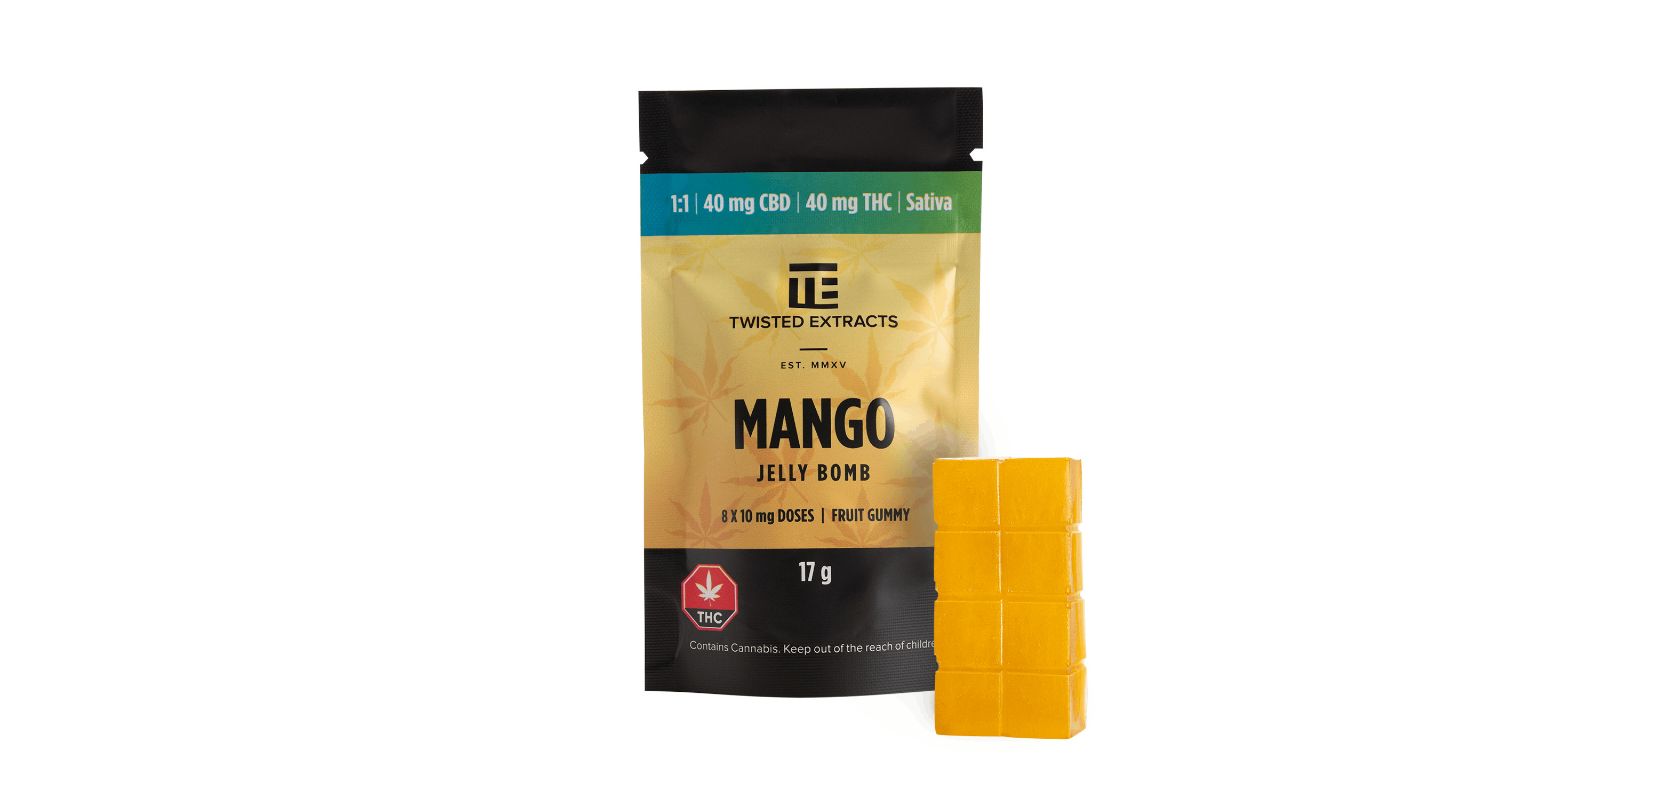 If you're in the market for a delicious and potent Sativa edible, check out the Twisted Extracts Mango Jelly Bombs 1:1.